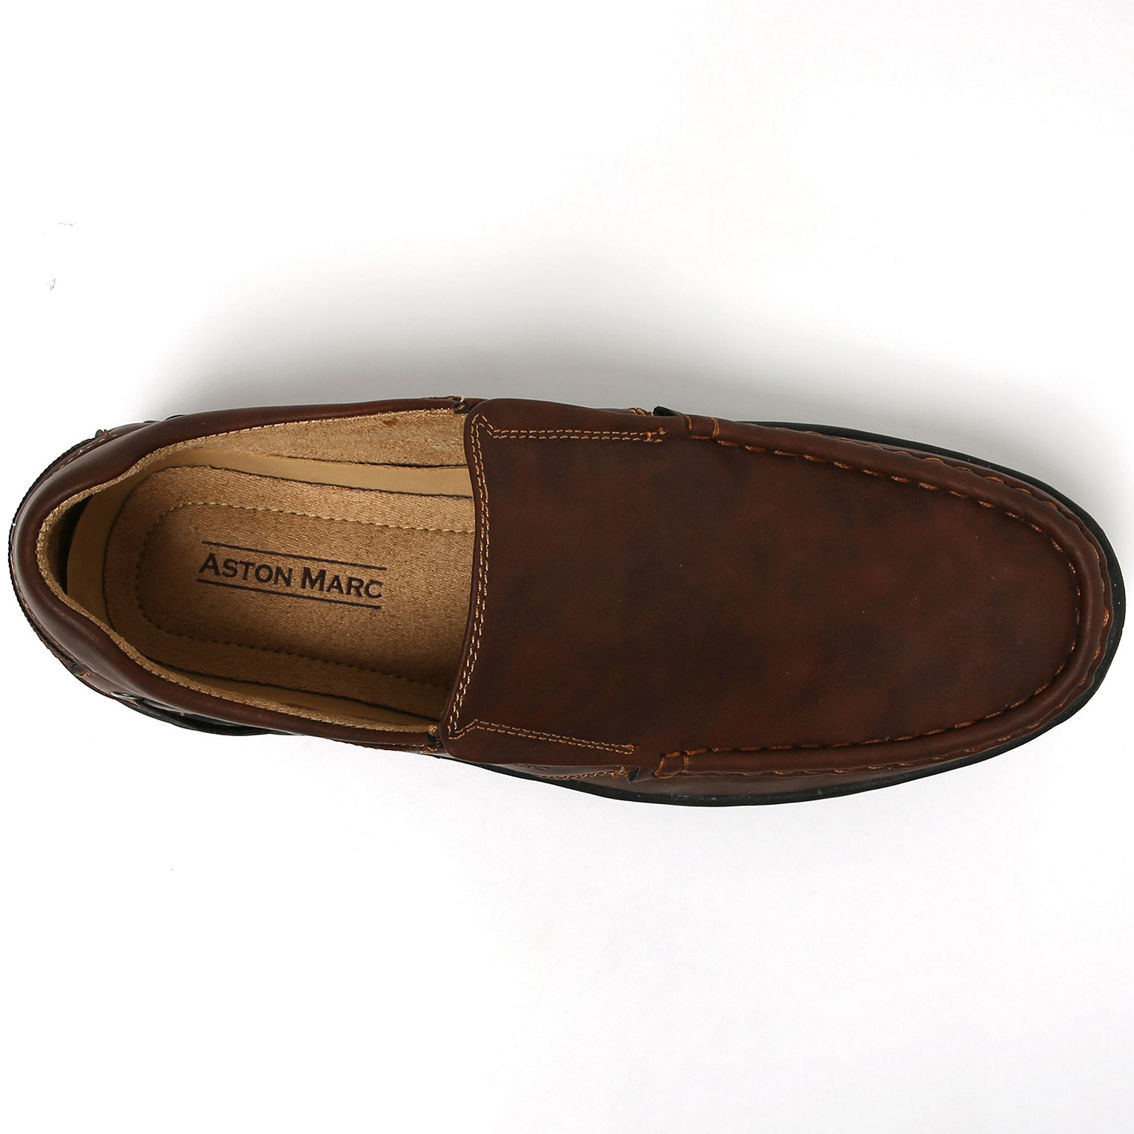 ASTON MARC MEN'S SLIP ON COMFORT CASUAL SHOES - Image 4 of 5